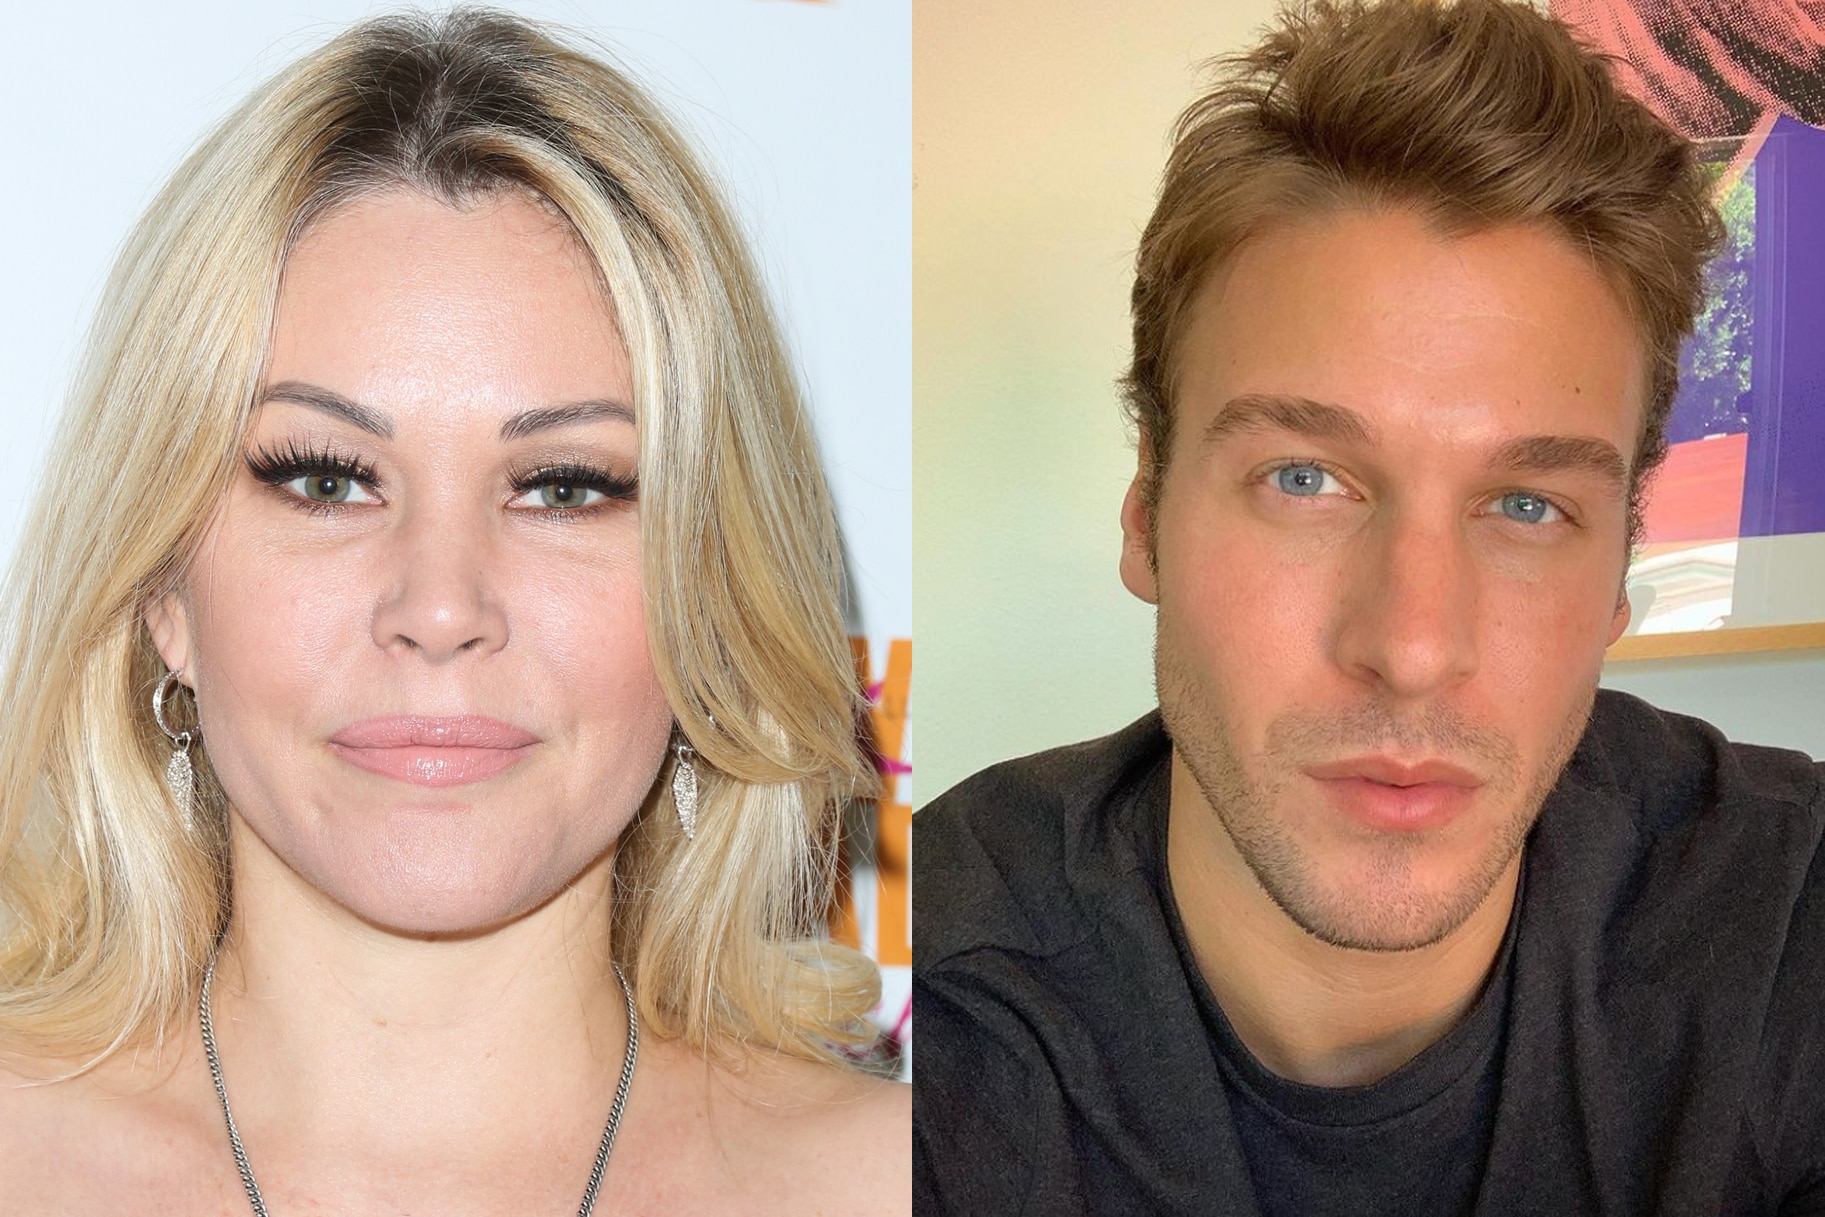 Photos of Shanna Moakler and Matthew Rondeau